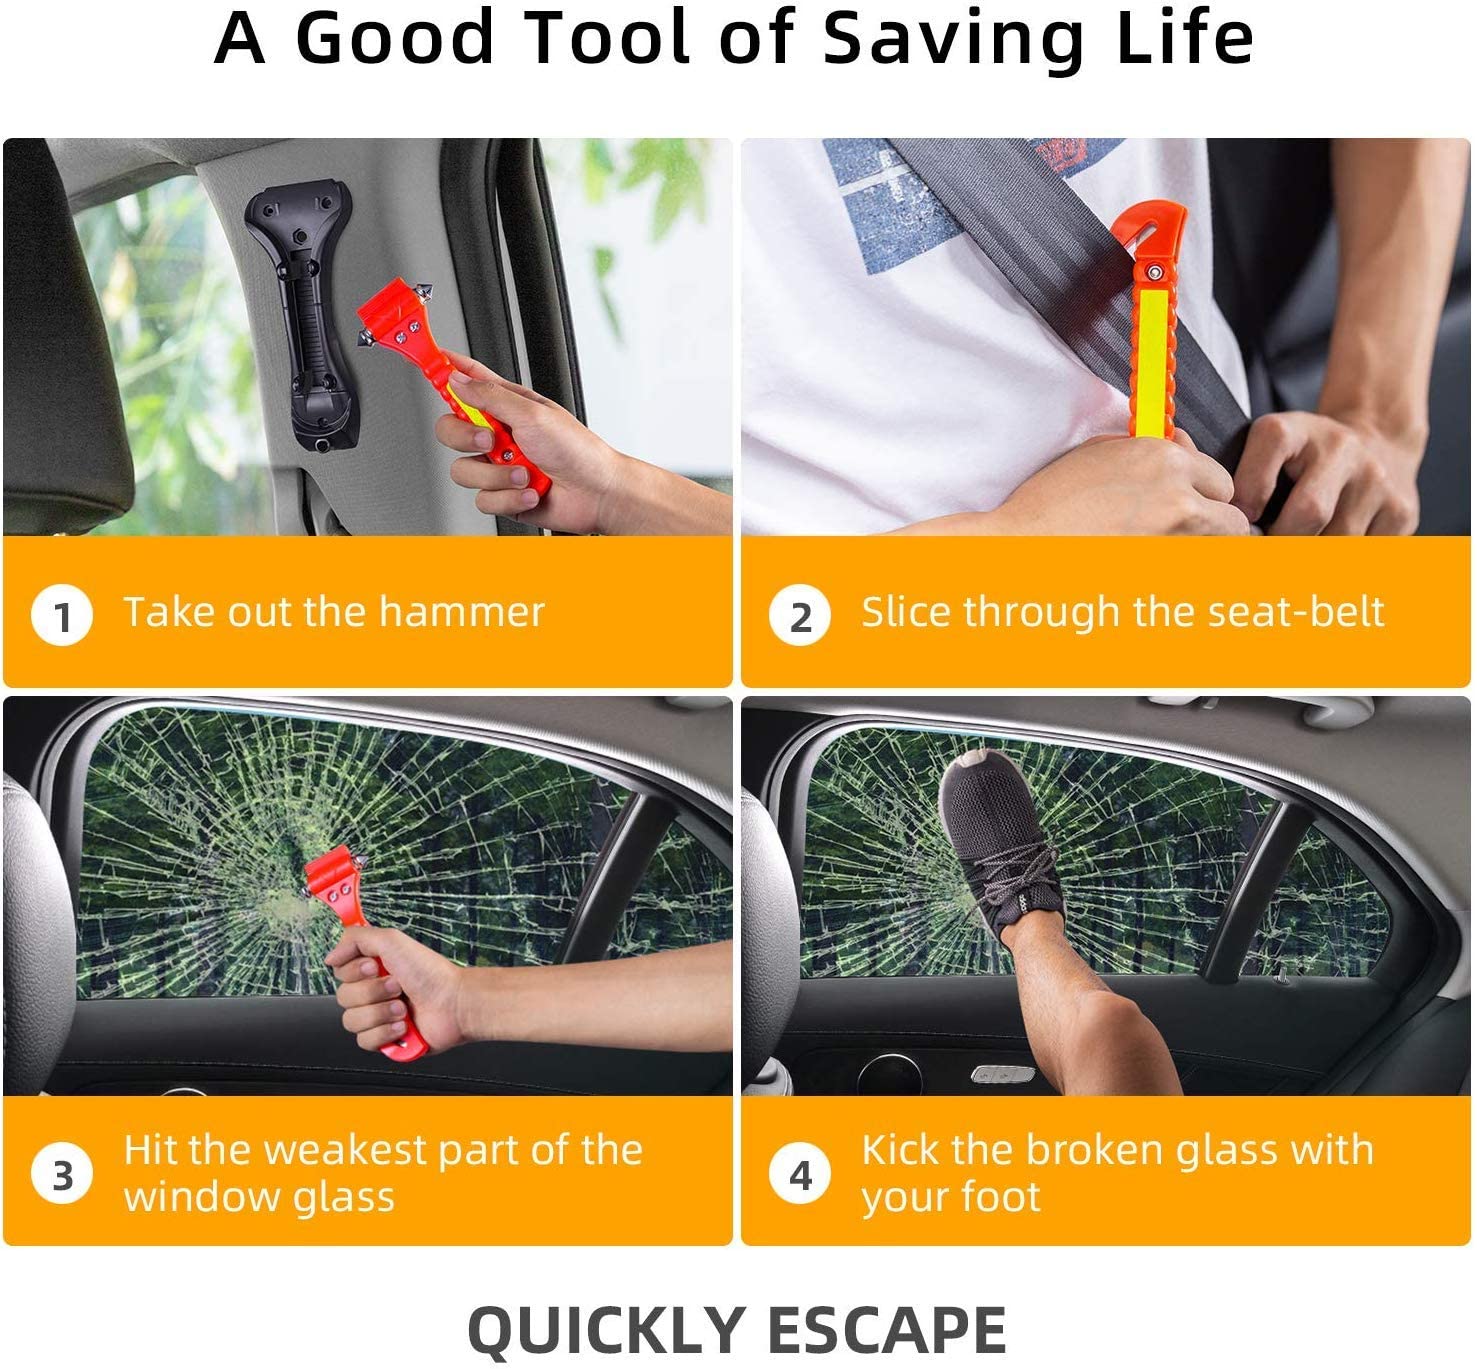 VT Tele FL Car Safety Hammer, Emergency Escape Tool with Car Window Breaker and Seat Belt Cutter, Premium Carbon Steel Life Saving Survival Kit, 2 Pack